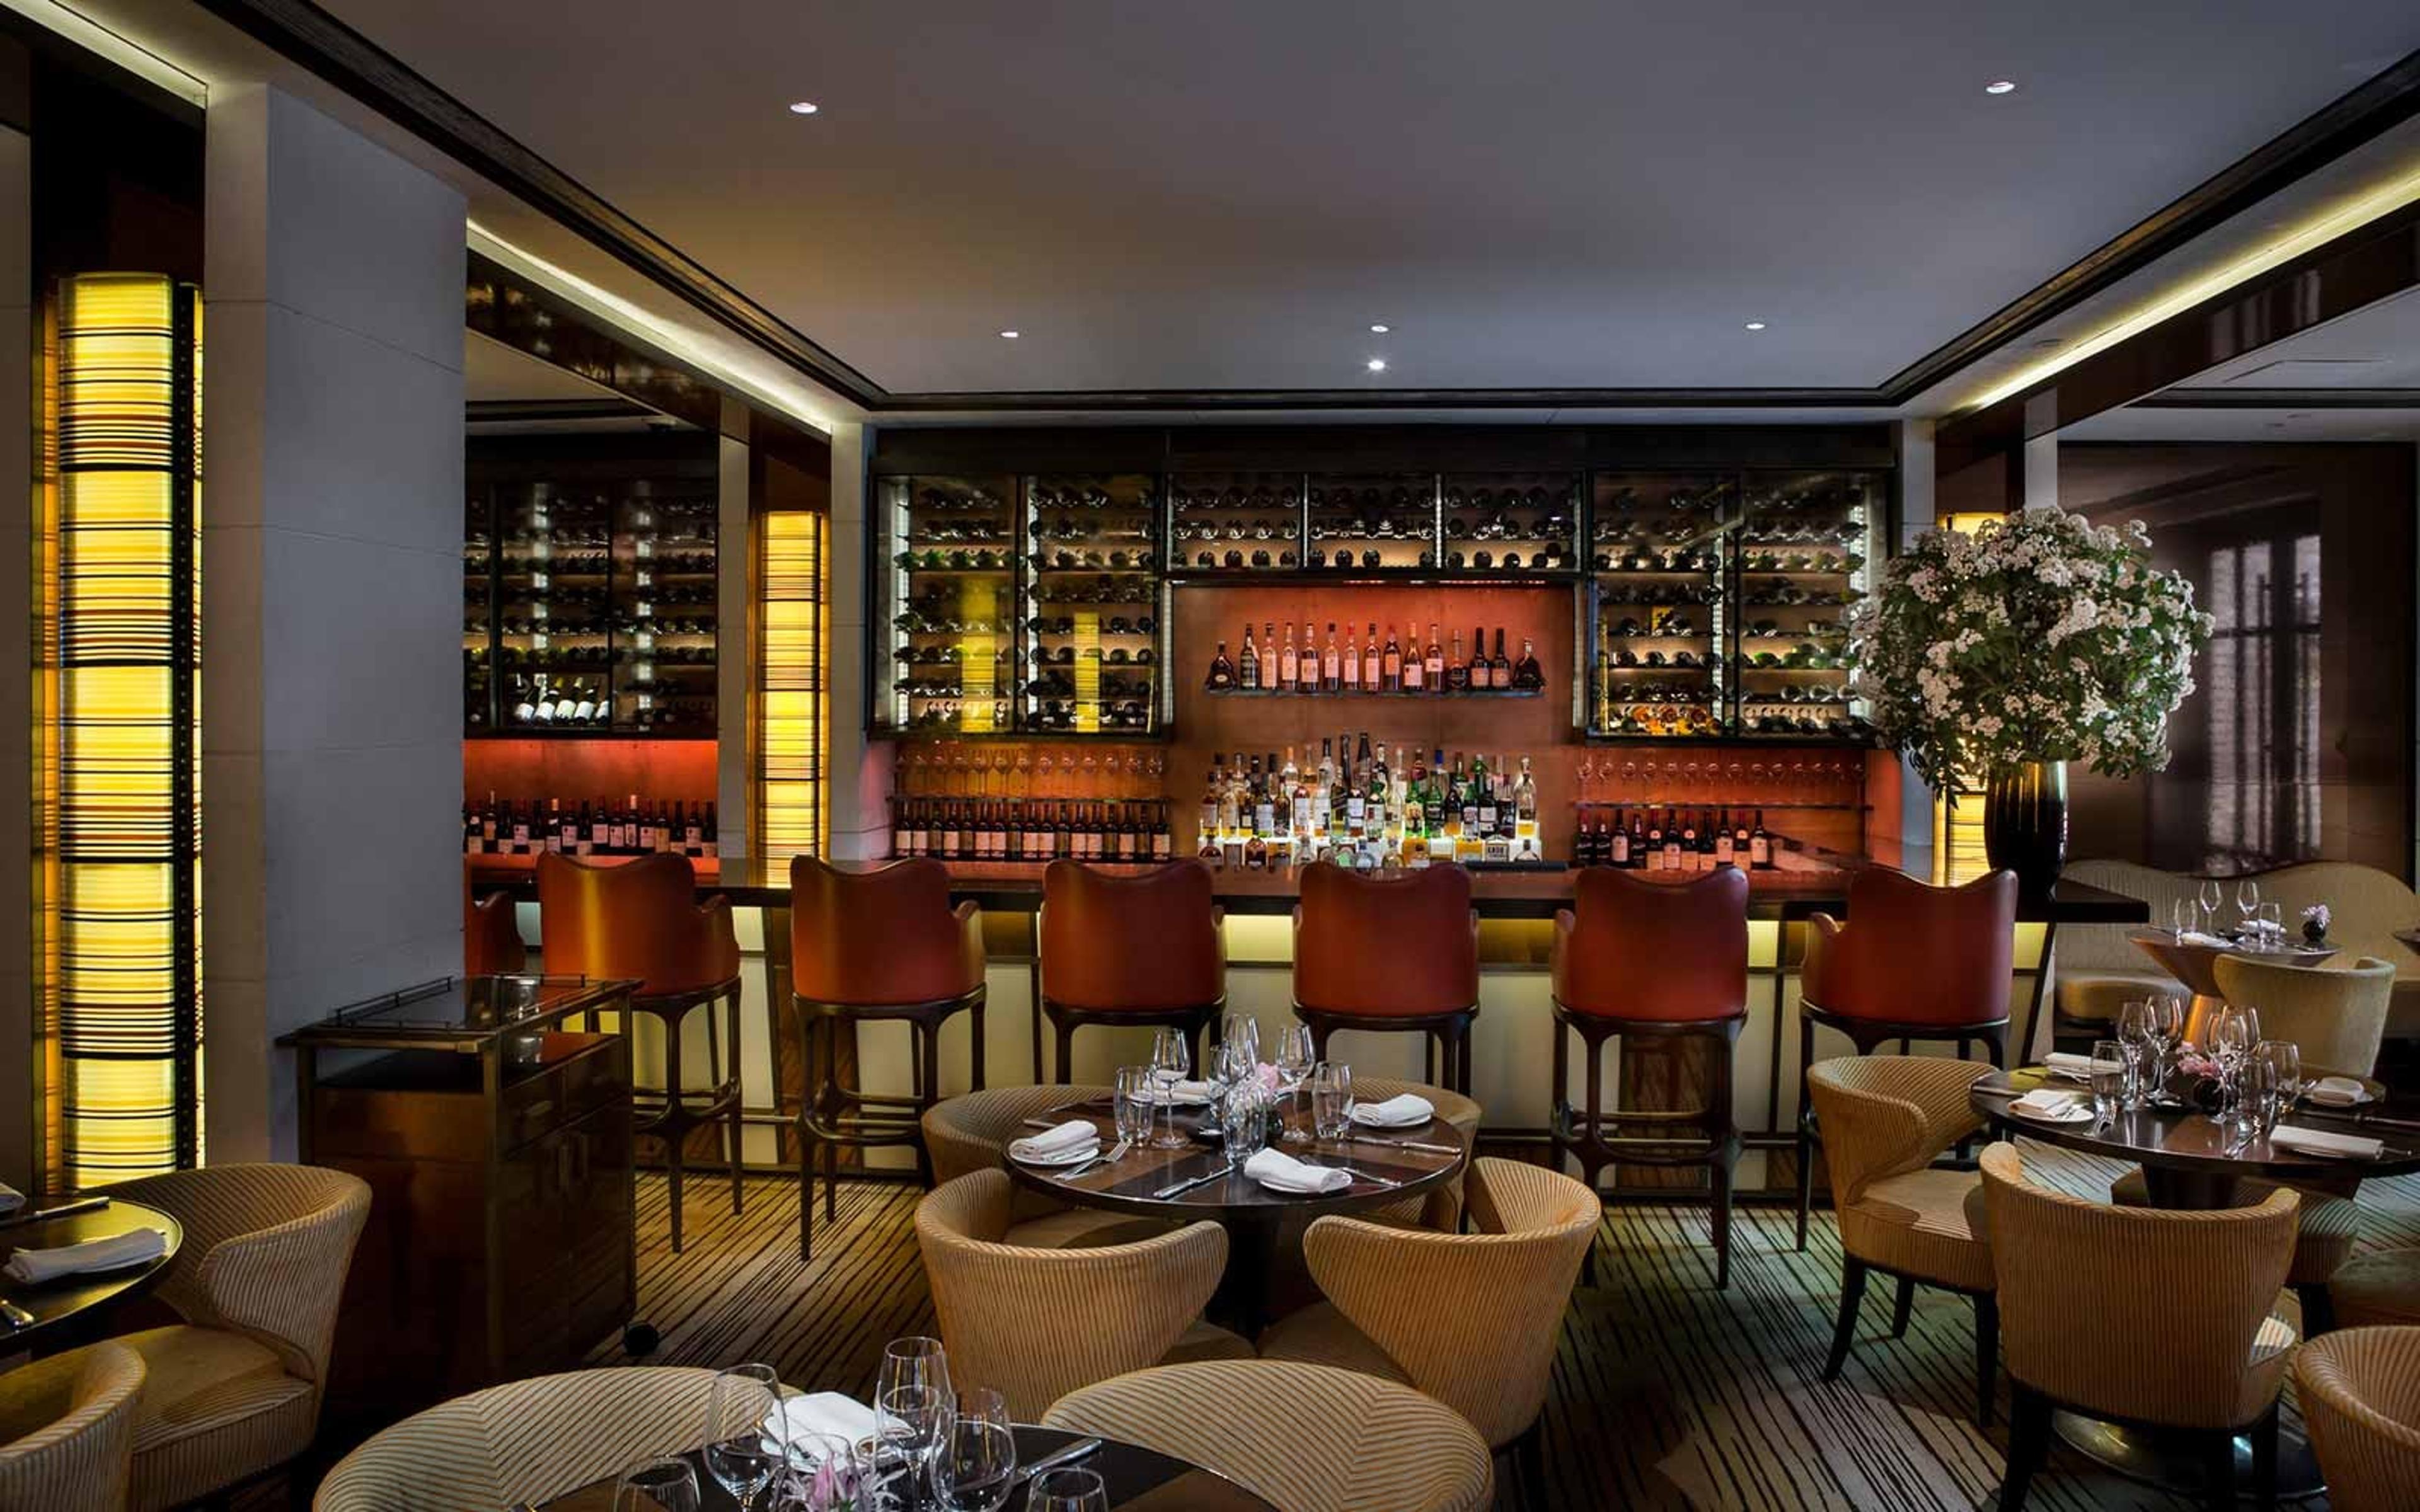 The Mark Restaurant by Jean-Georges